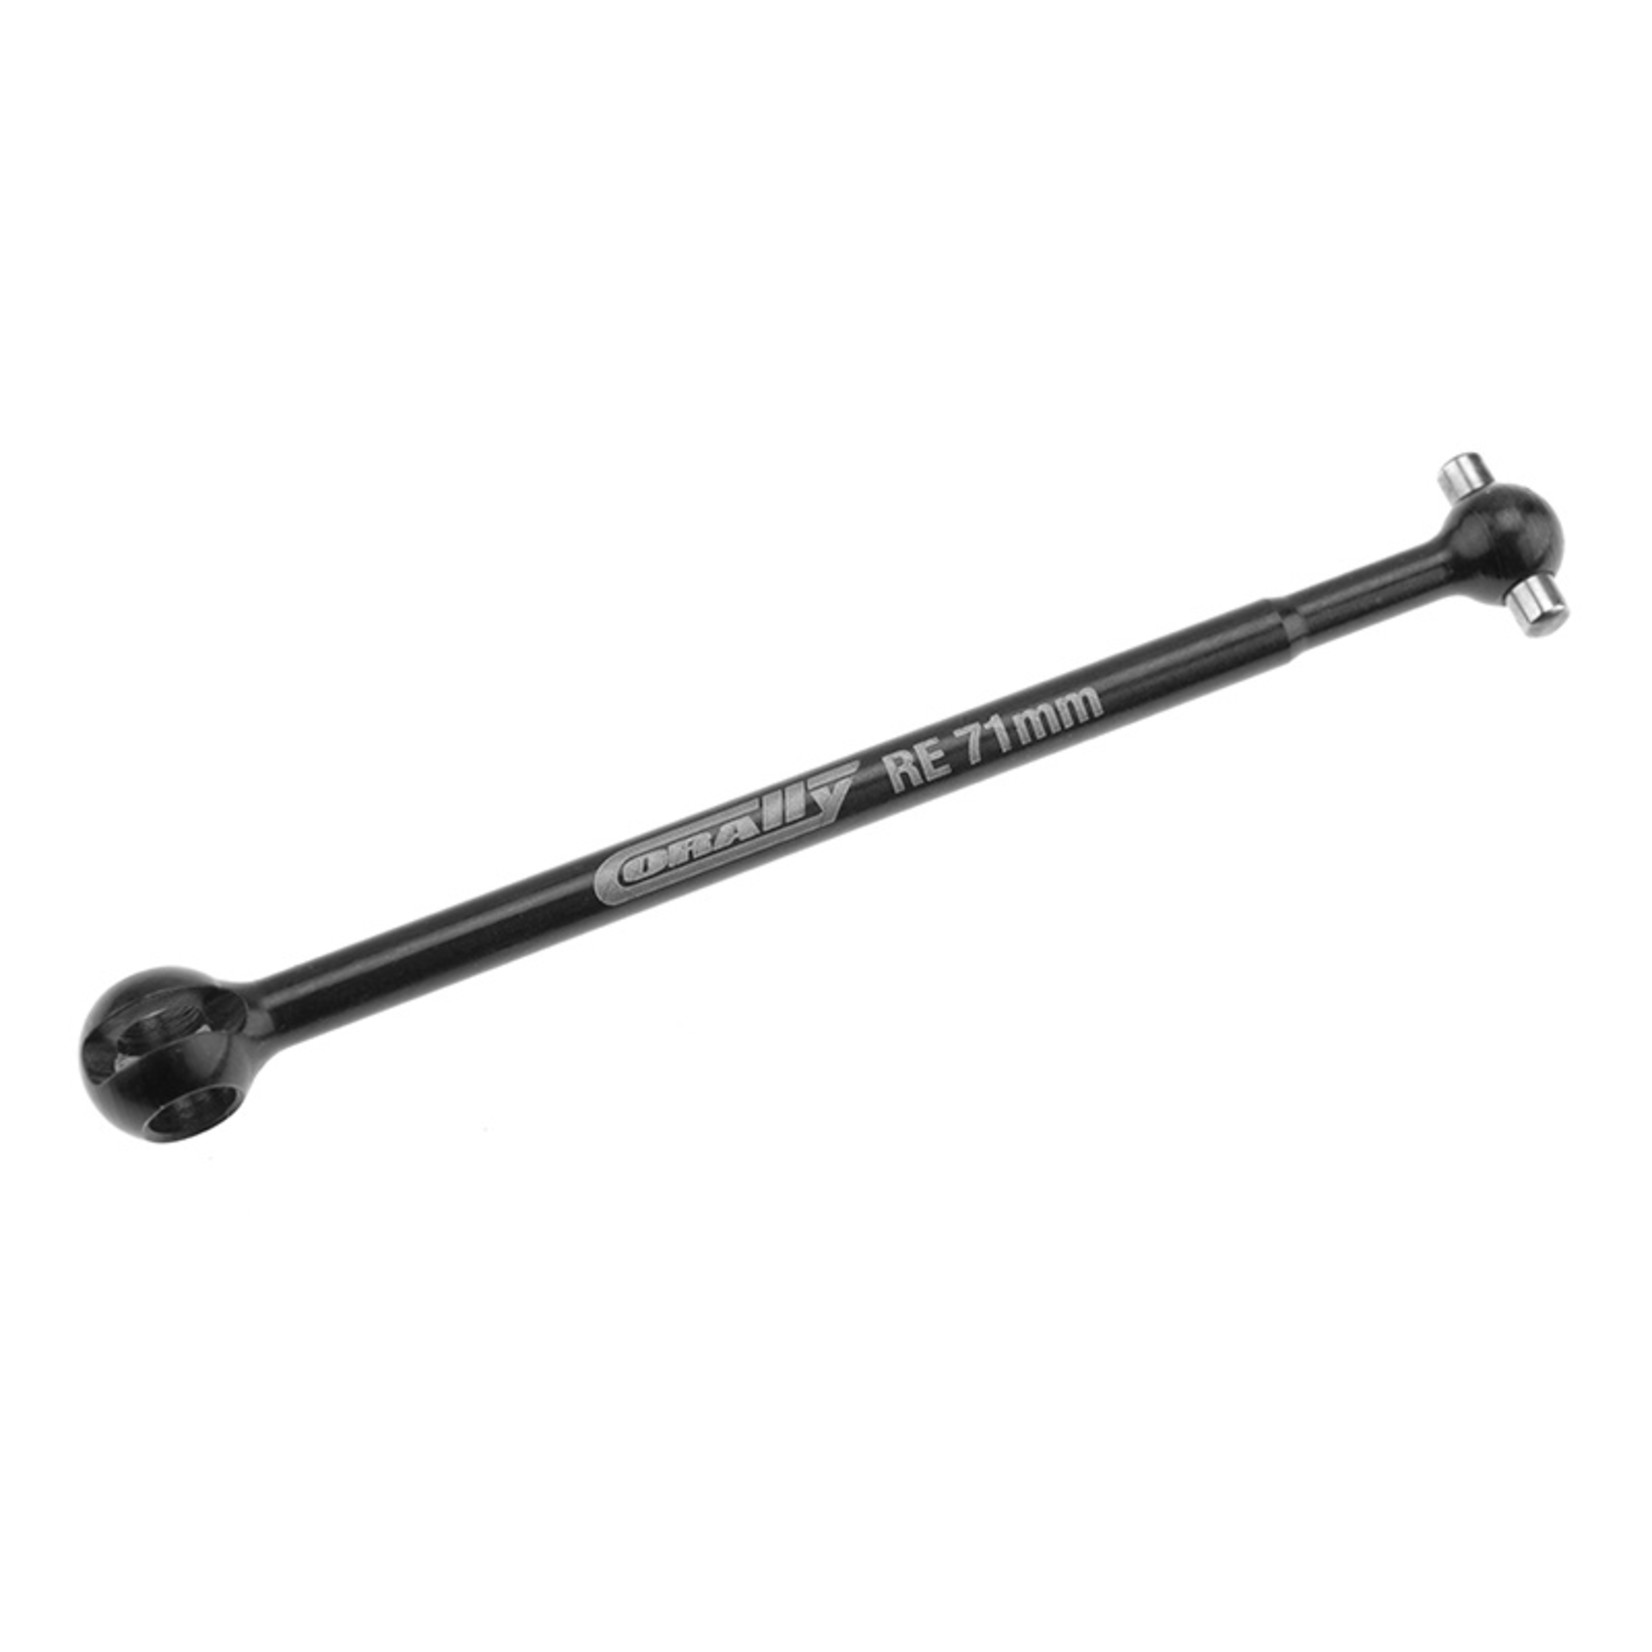 Corally (Team Corally) Drive Shaft for CVD - Rear - Steel - 1 pc: SBX410